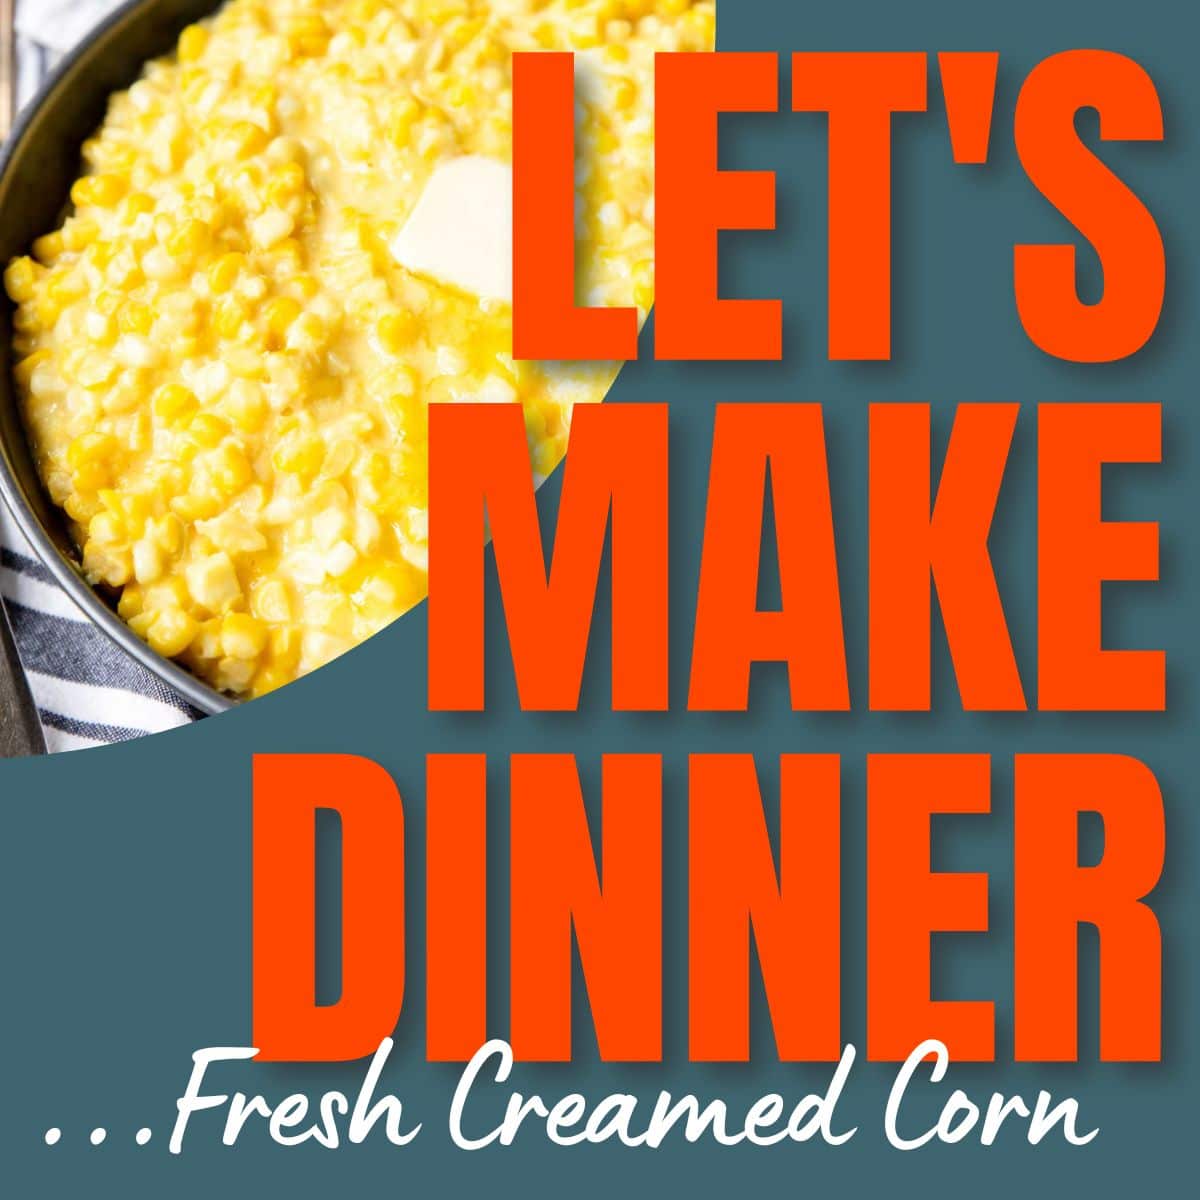 Creamed corn with text overlay for the podcast "Let's Make Dinner"